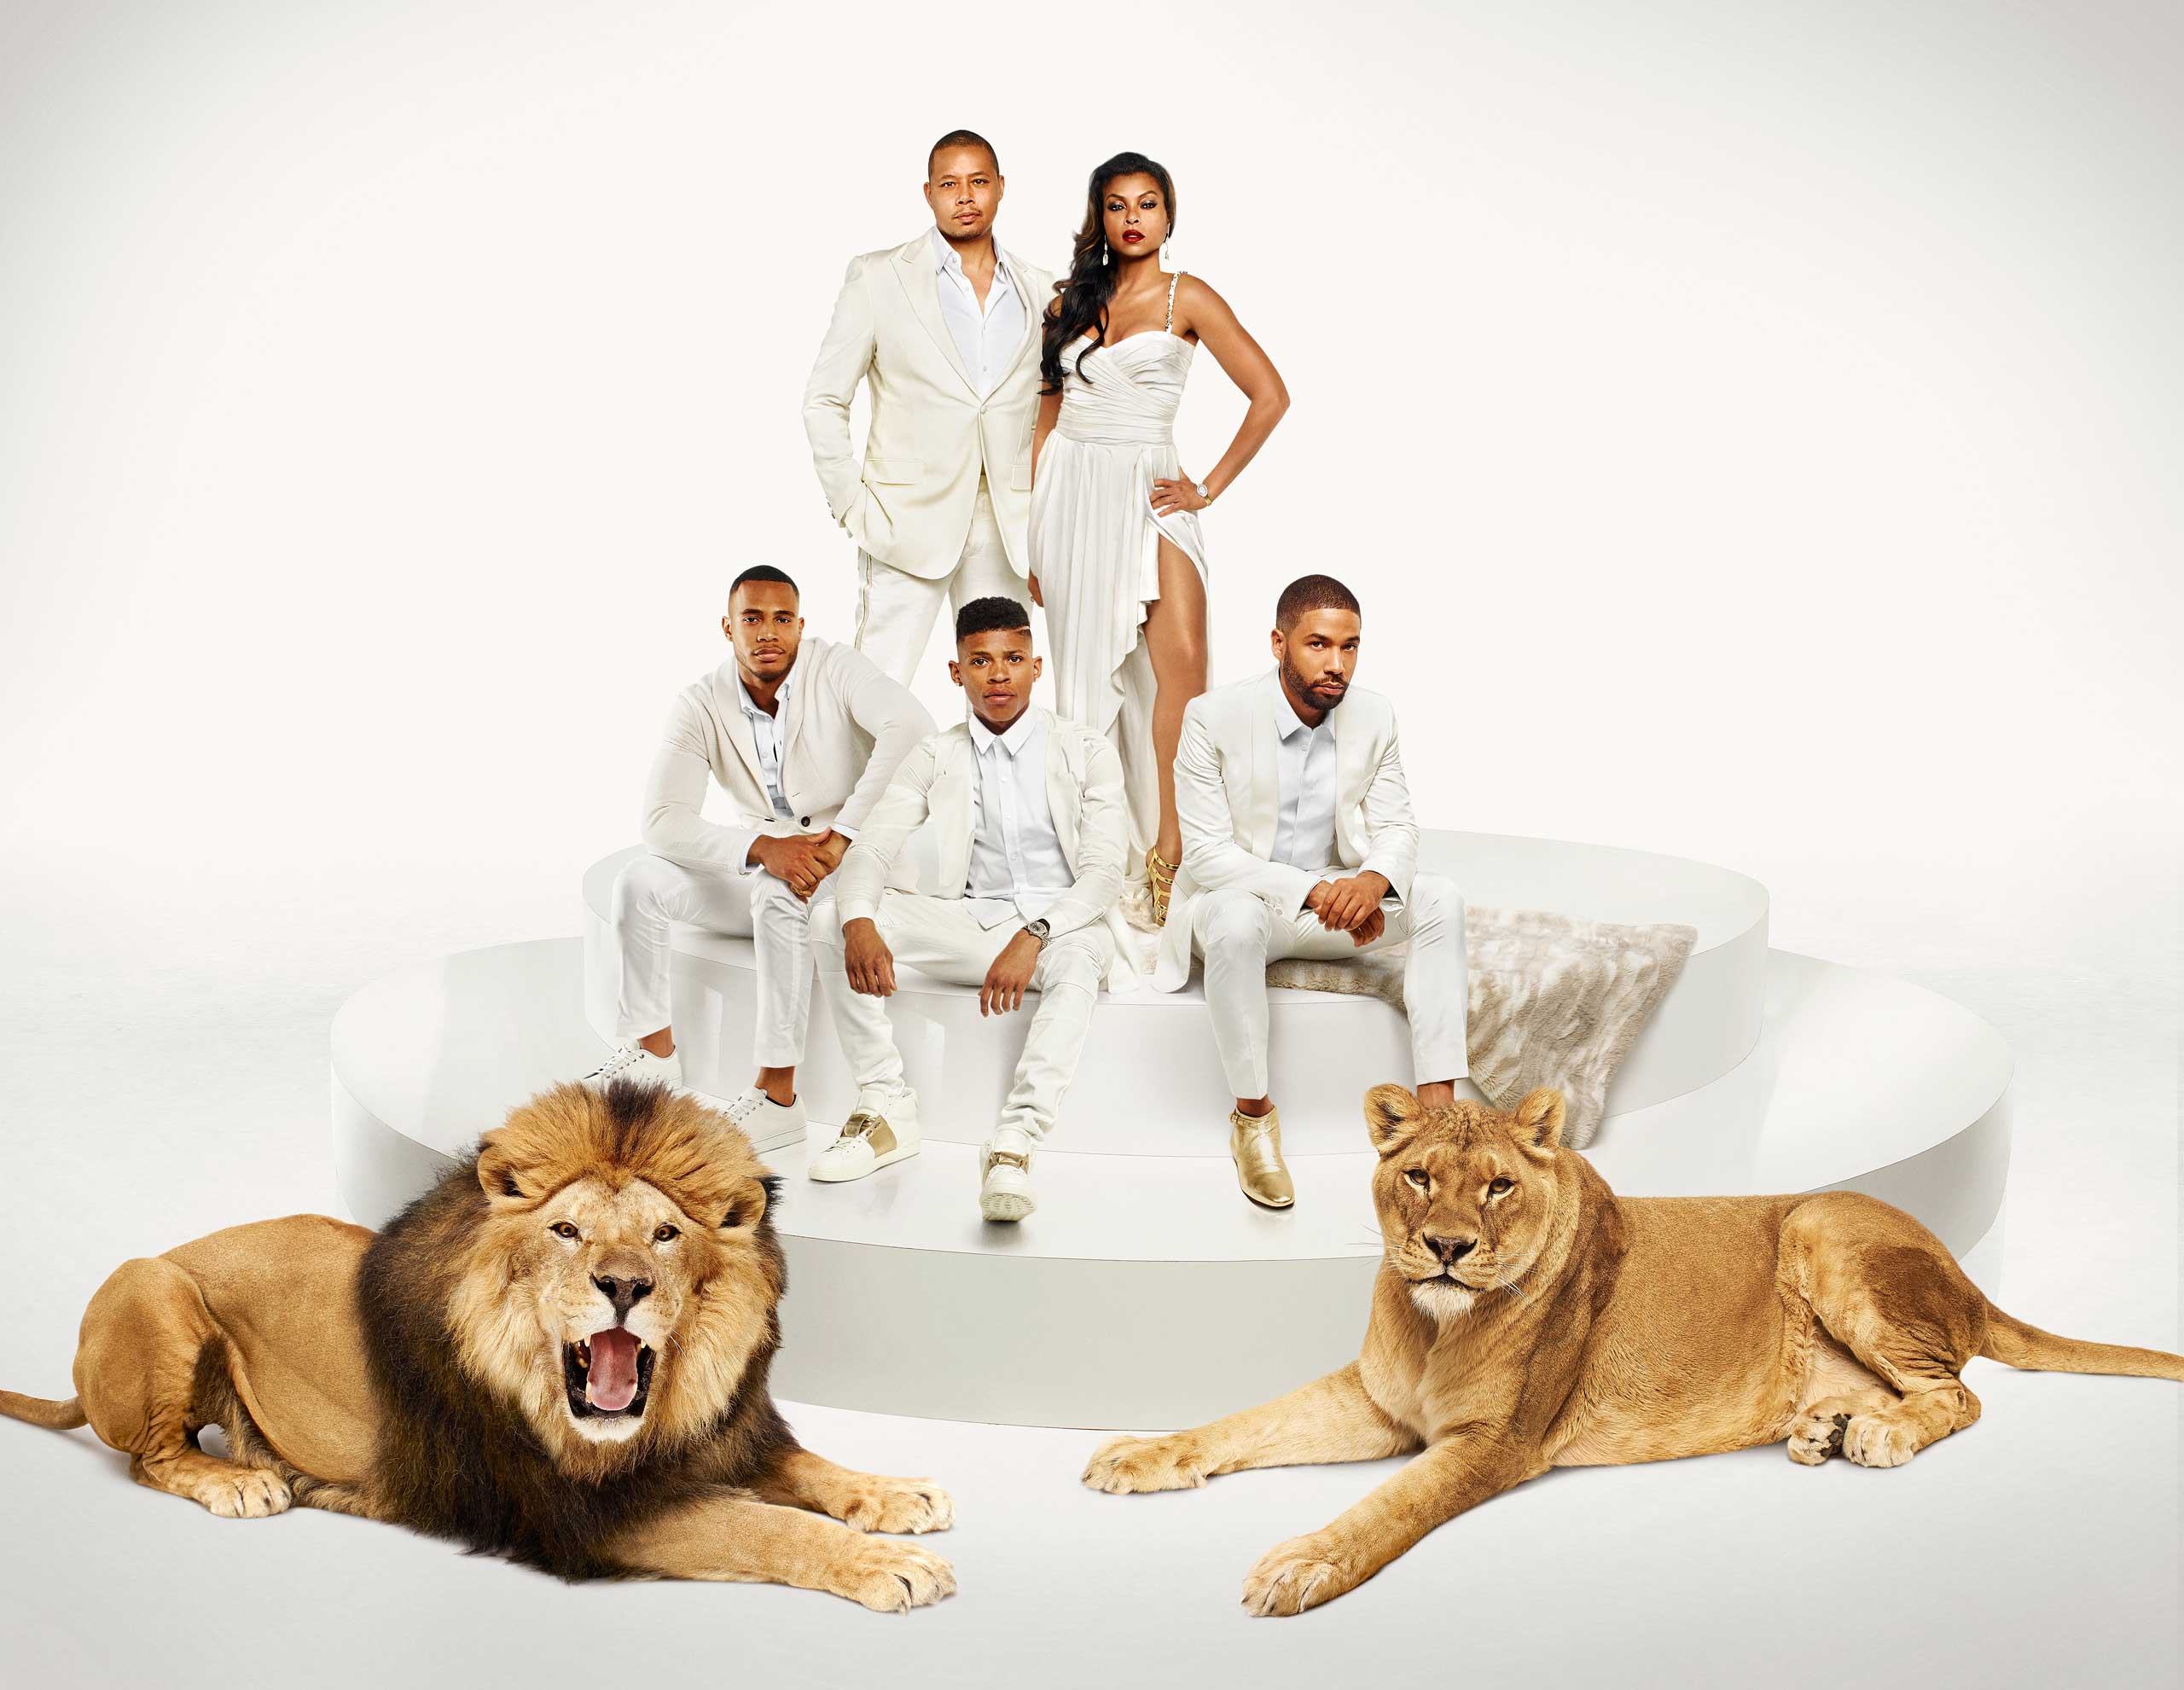 EMPIRE: Cast Pictured L-R: (Bottom Row) Trai Byers as Andre Lyon, Bryshere Gray as Hakeem Lyon and Jussie Smollett as Jamal Lyon (Top Row) Terrence Howard as Lucious Lyon and Taraji P. Henson as Cookie Lyon in EMPIRE. (FOX)